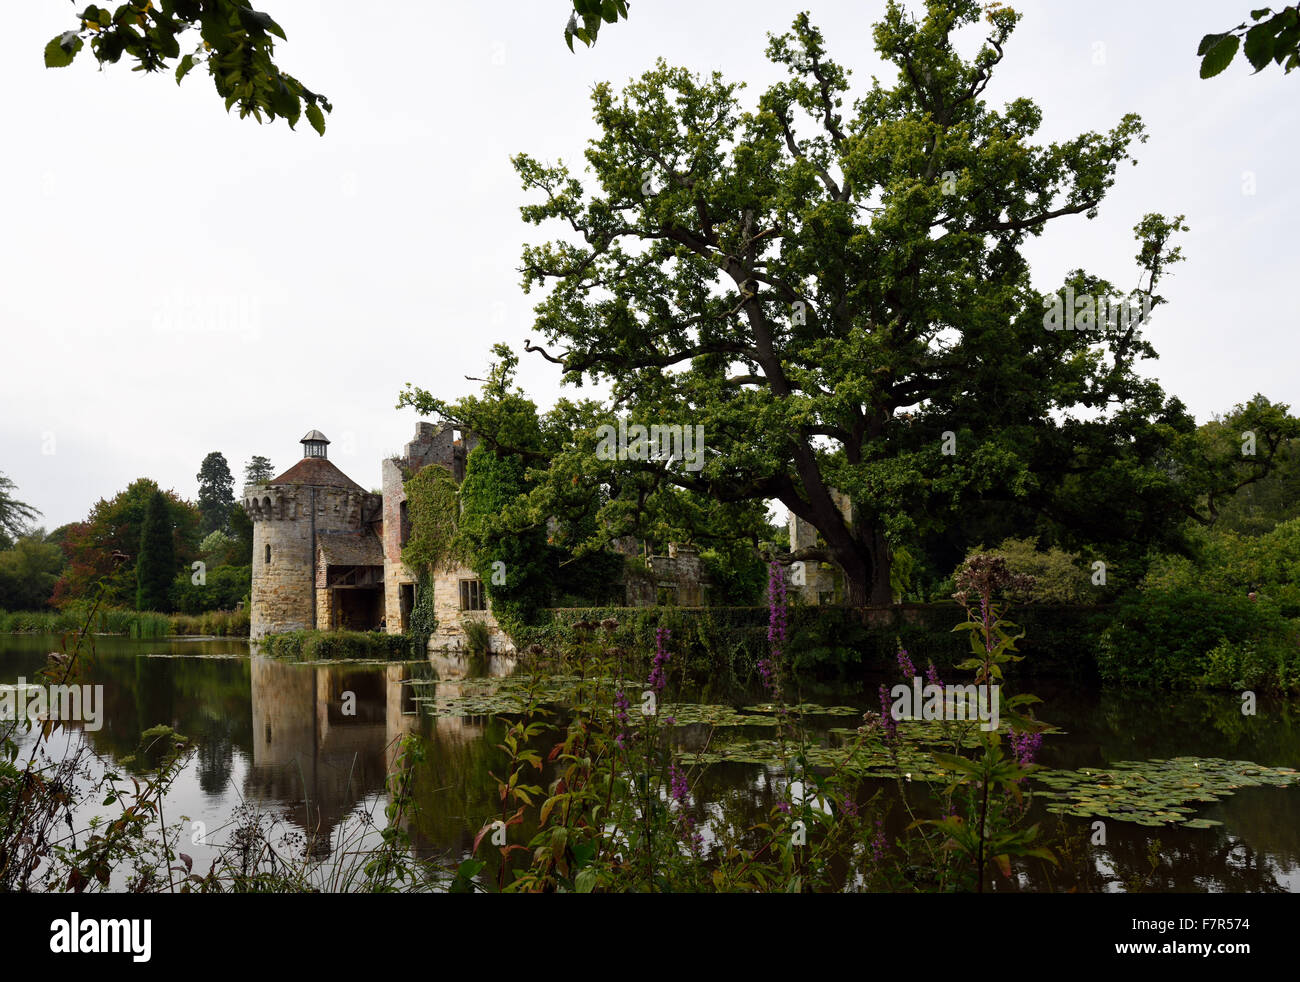 Scotney Castle, Kent. Scotney Castle is a country house, romantic garden and 14th century moated castle - all set in a beautiful wooded estate. Stock Photo